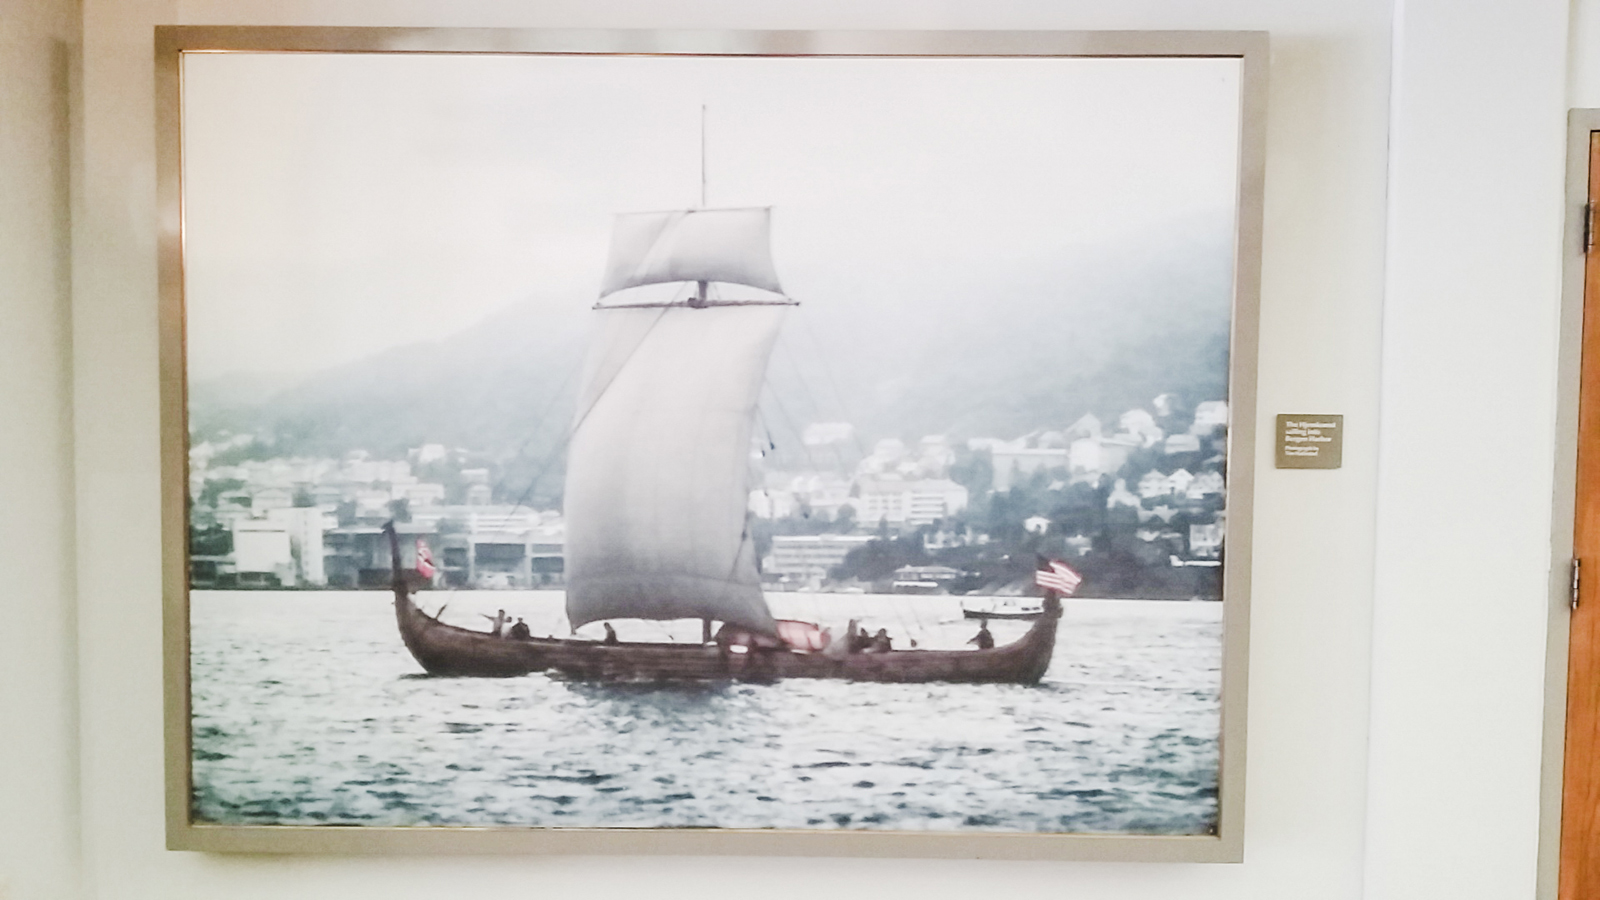 Photograph of the Hjemkomst on the waters in a museum in Moorhead, Minnesota.